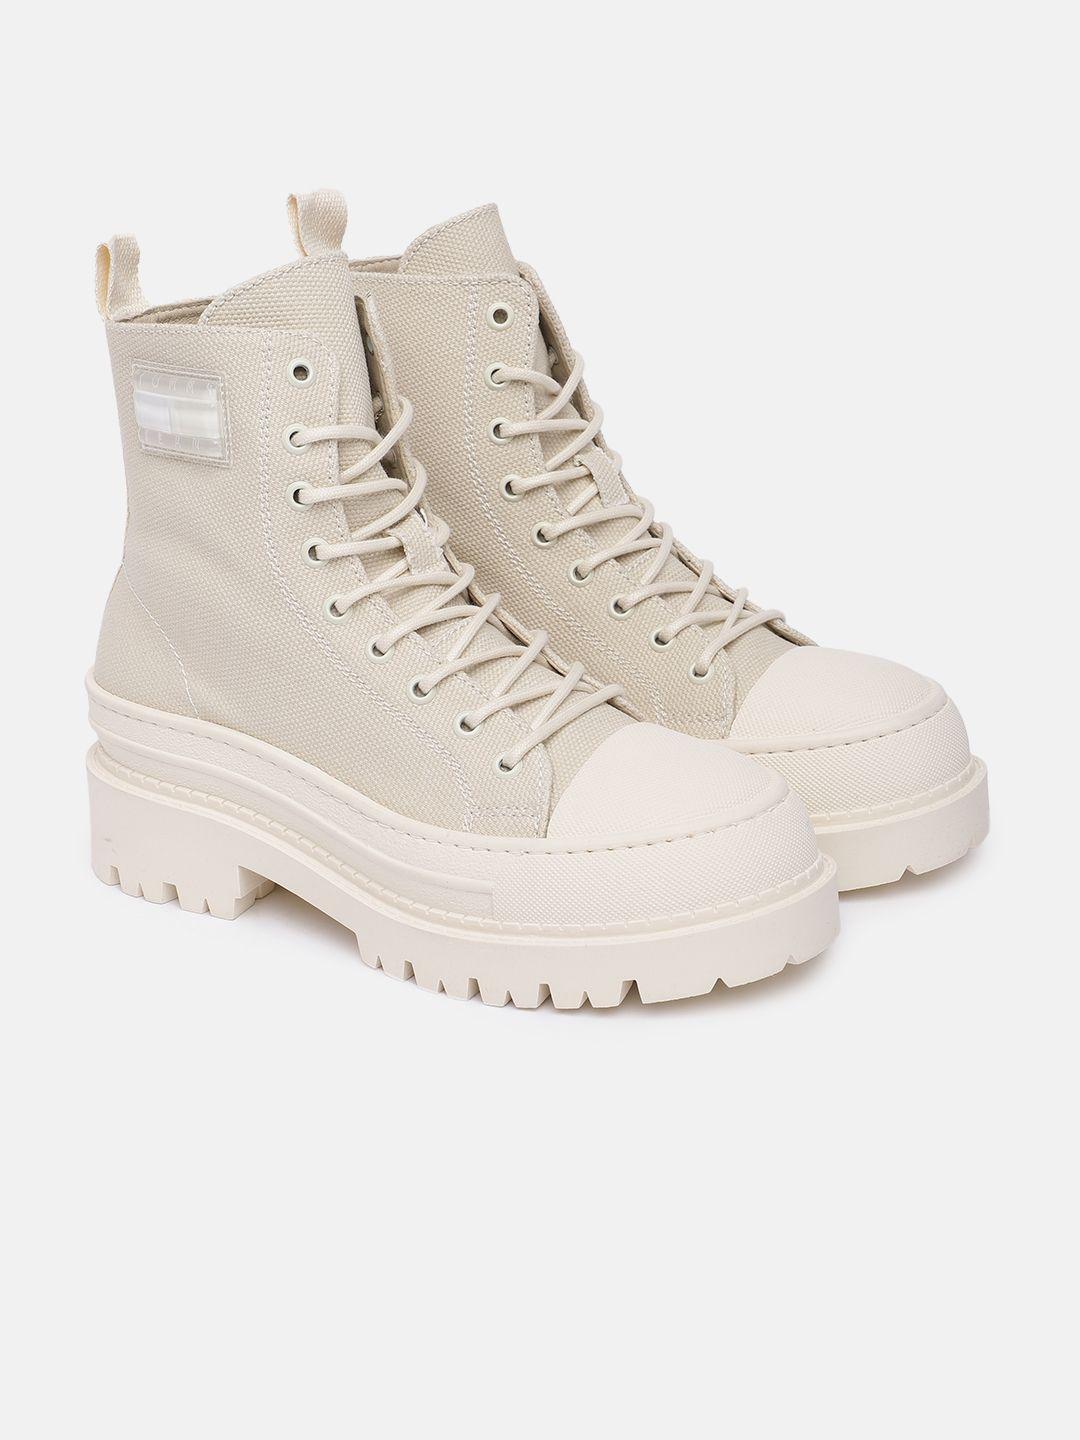 tommy-hilfiger-women-solid-high-top-platform-canvas-chunky-boots